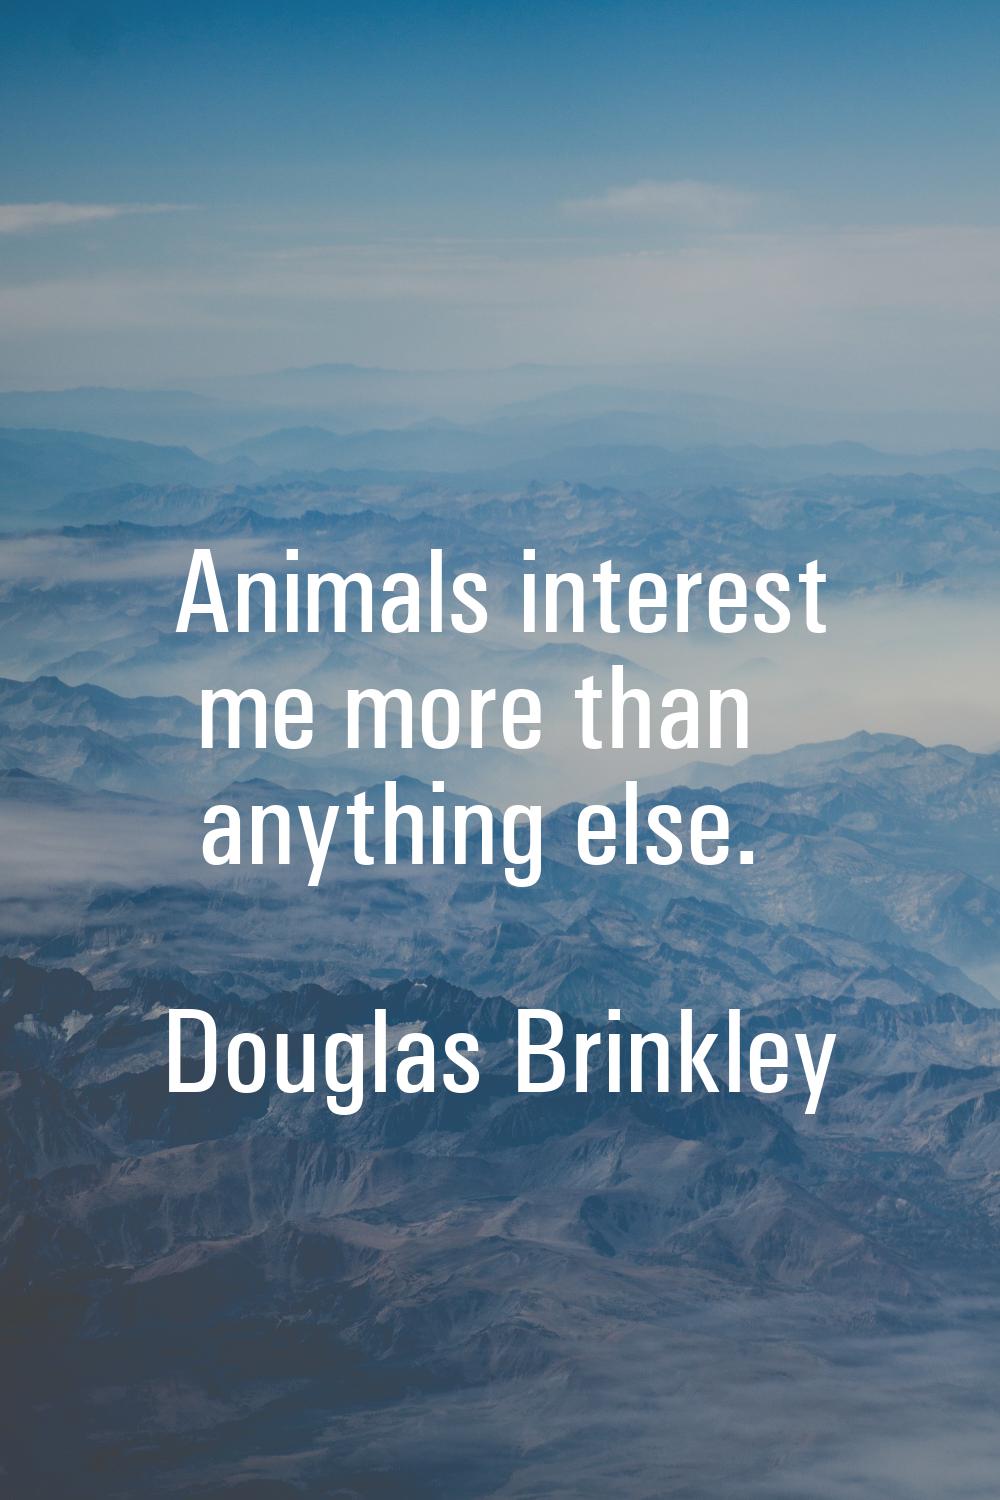 Animals interest me more than anything else.